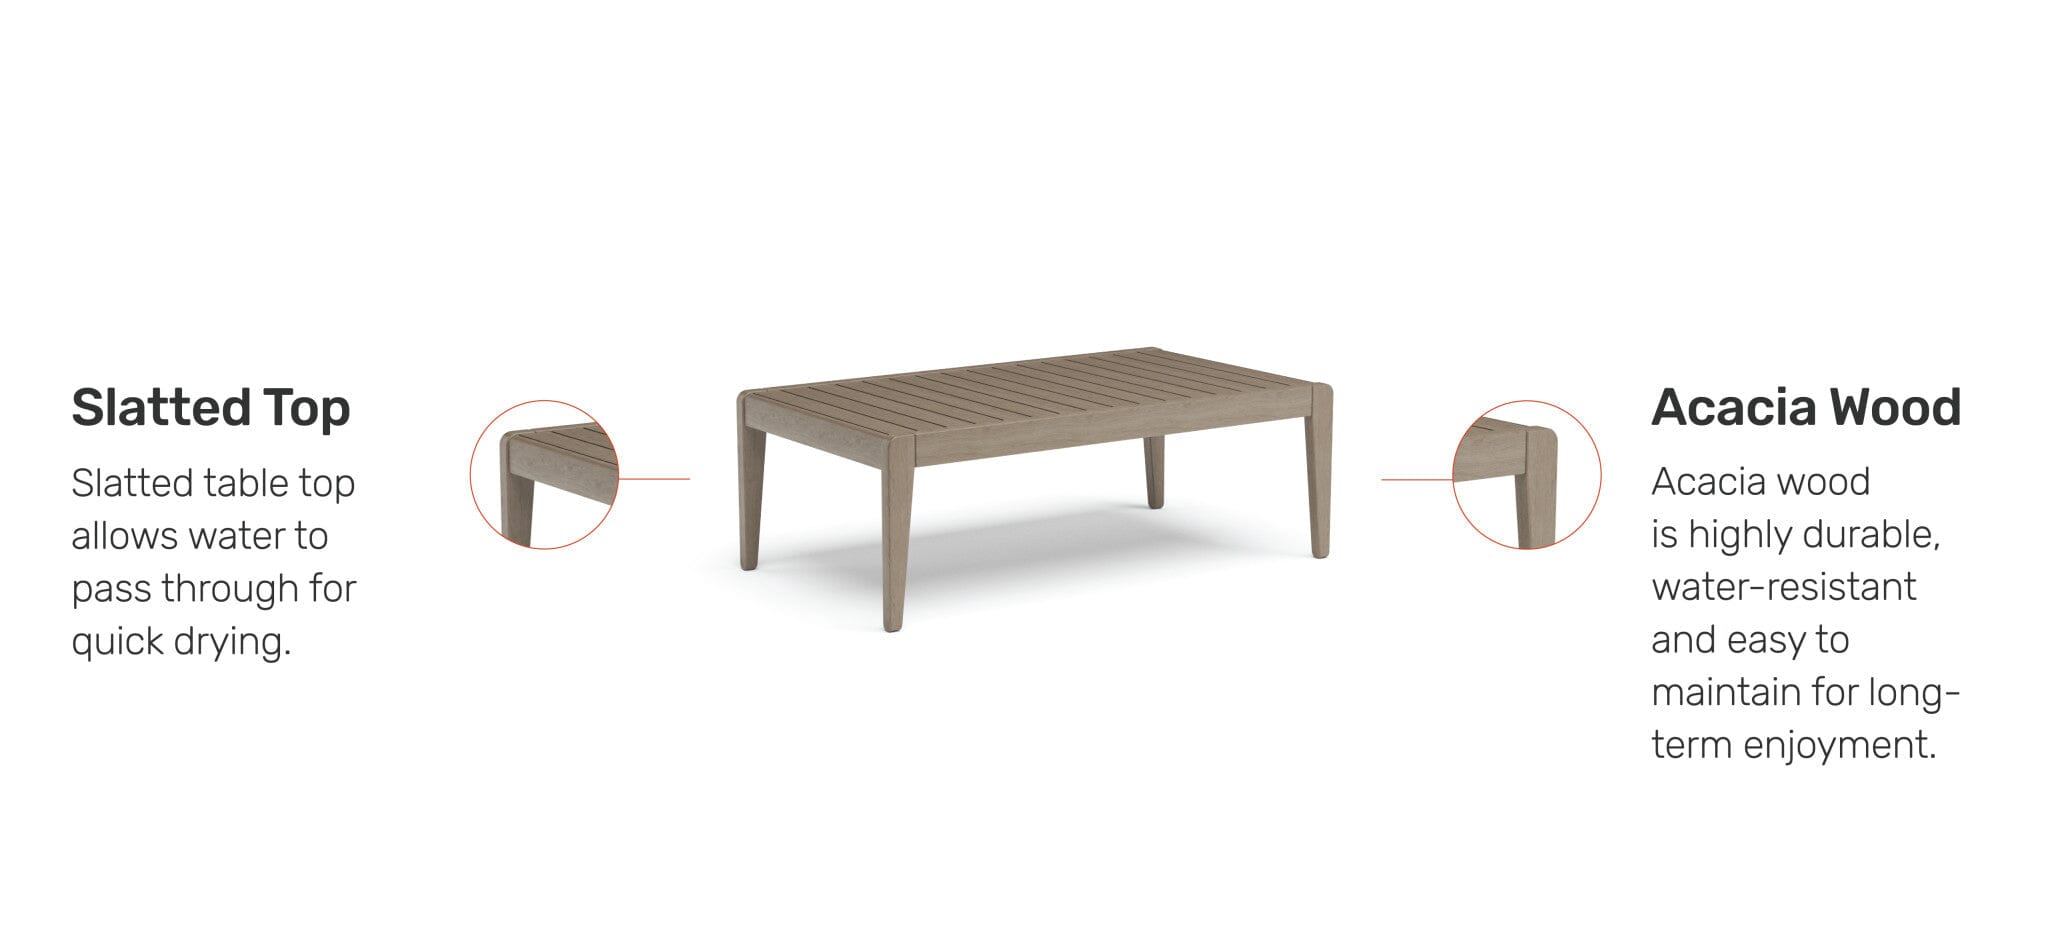 Transitional Outdoor Coffee Table By Sustain Outdoor Coffee Table Sustain